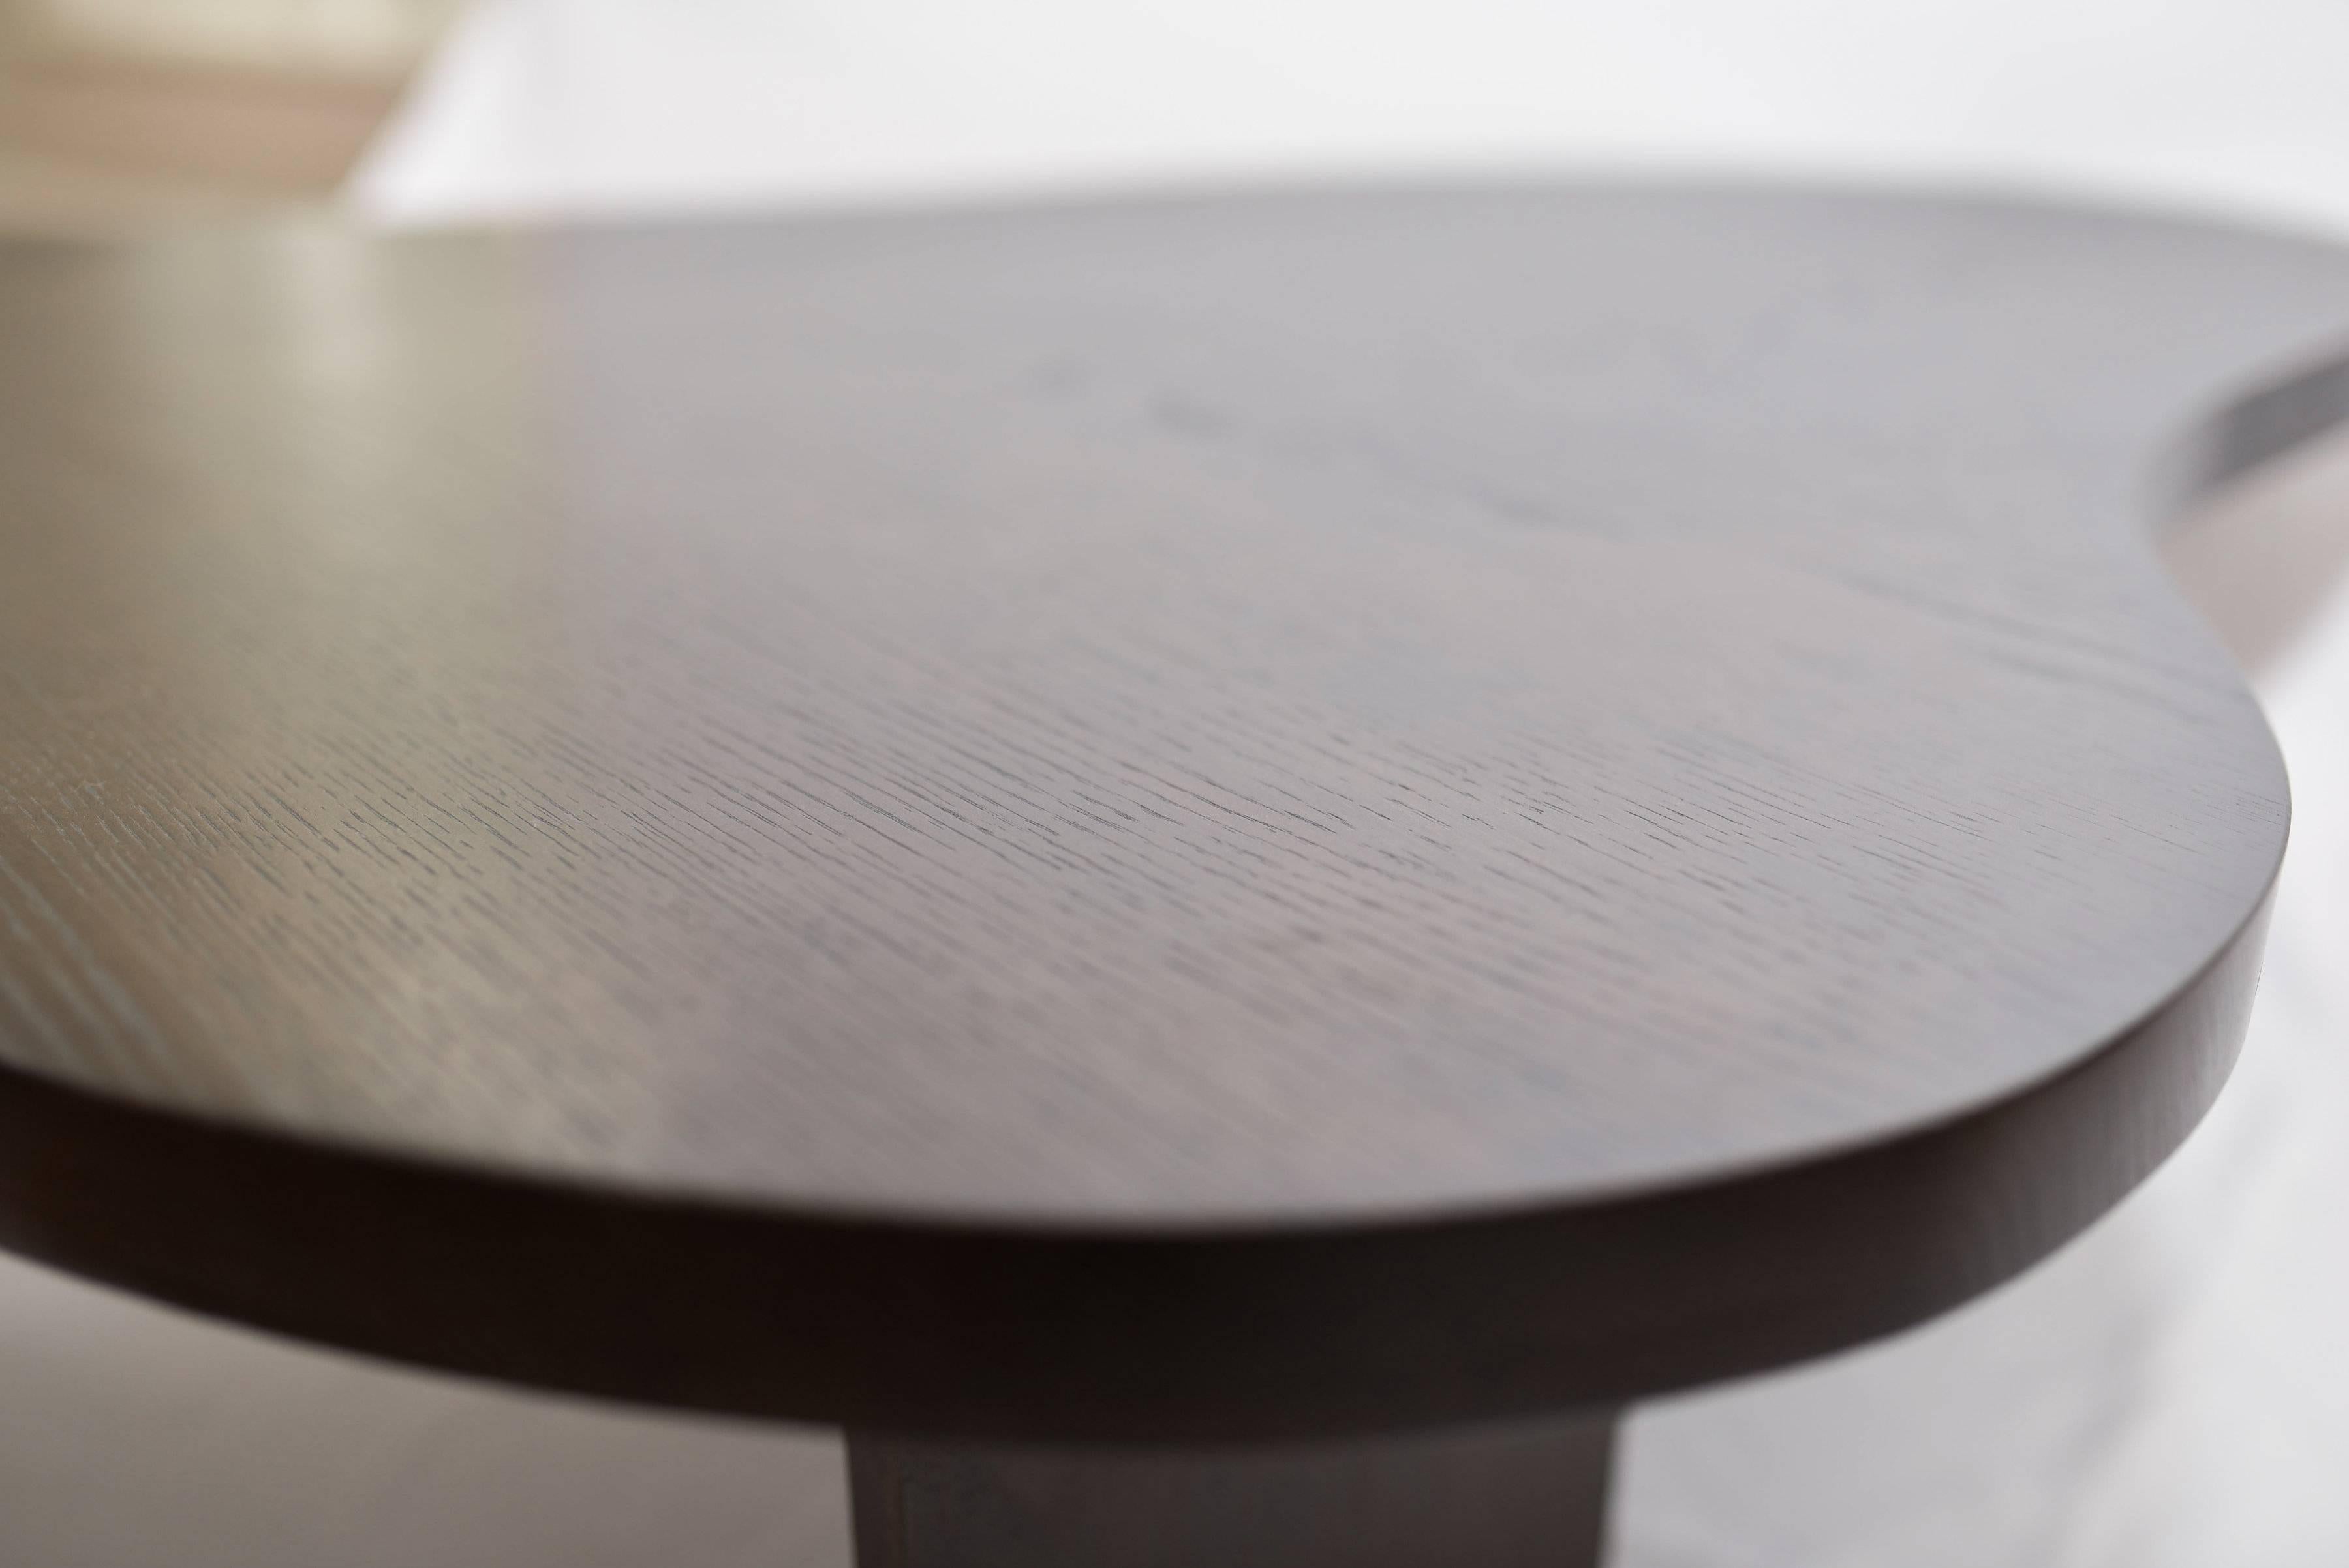 Handcrafted in pieced solid ash, our Colin cocktail table is curvaceous, simple, and elegant. With a nod to midcentury design, yet classically updated.

A modern, curved large coffee table with a contemporary perspective.